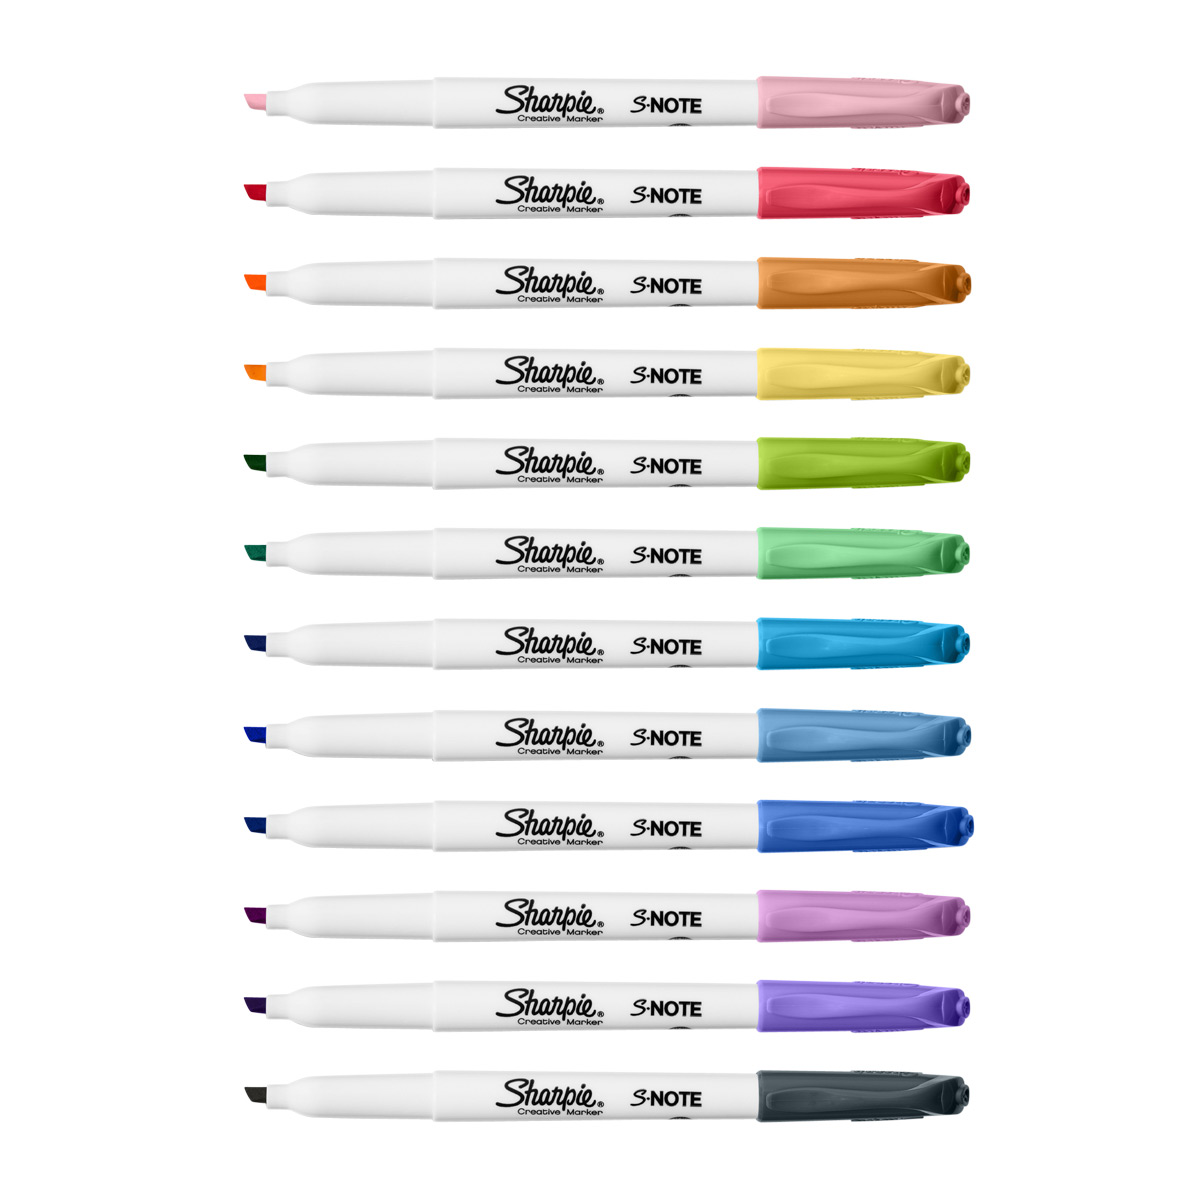 https://www.containerstore.com/catalogimages/469015/10091437-sharpie-s-note-chisel-tip-m.jpg